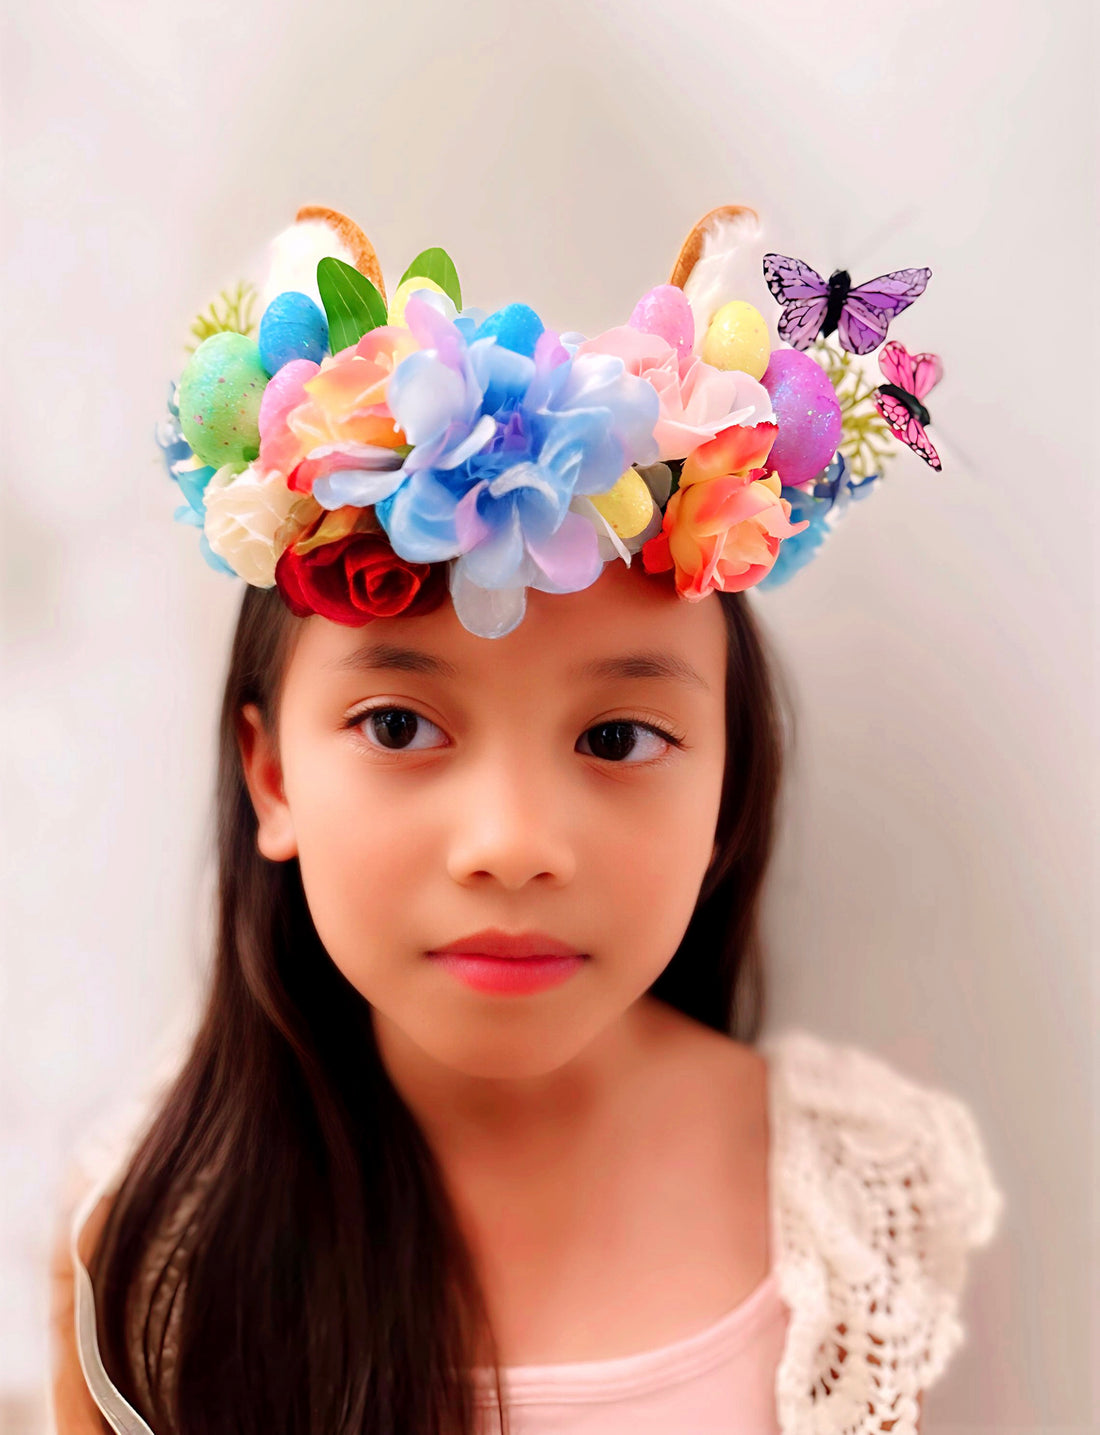 Kids flower crown with easter eggs and butterflies.